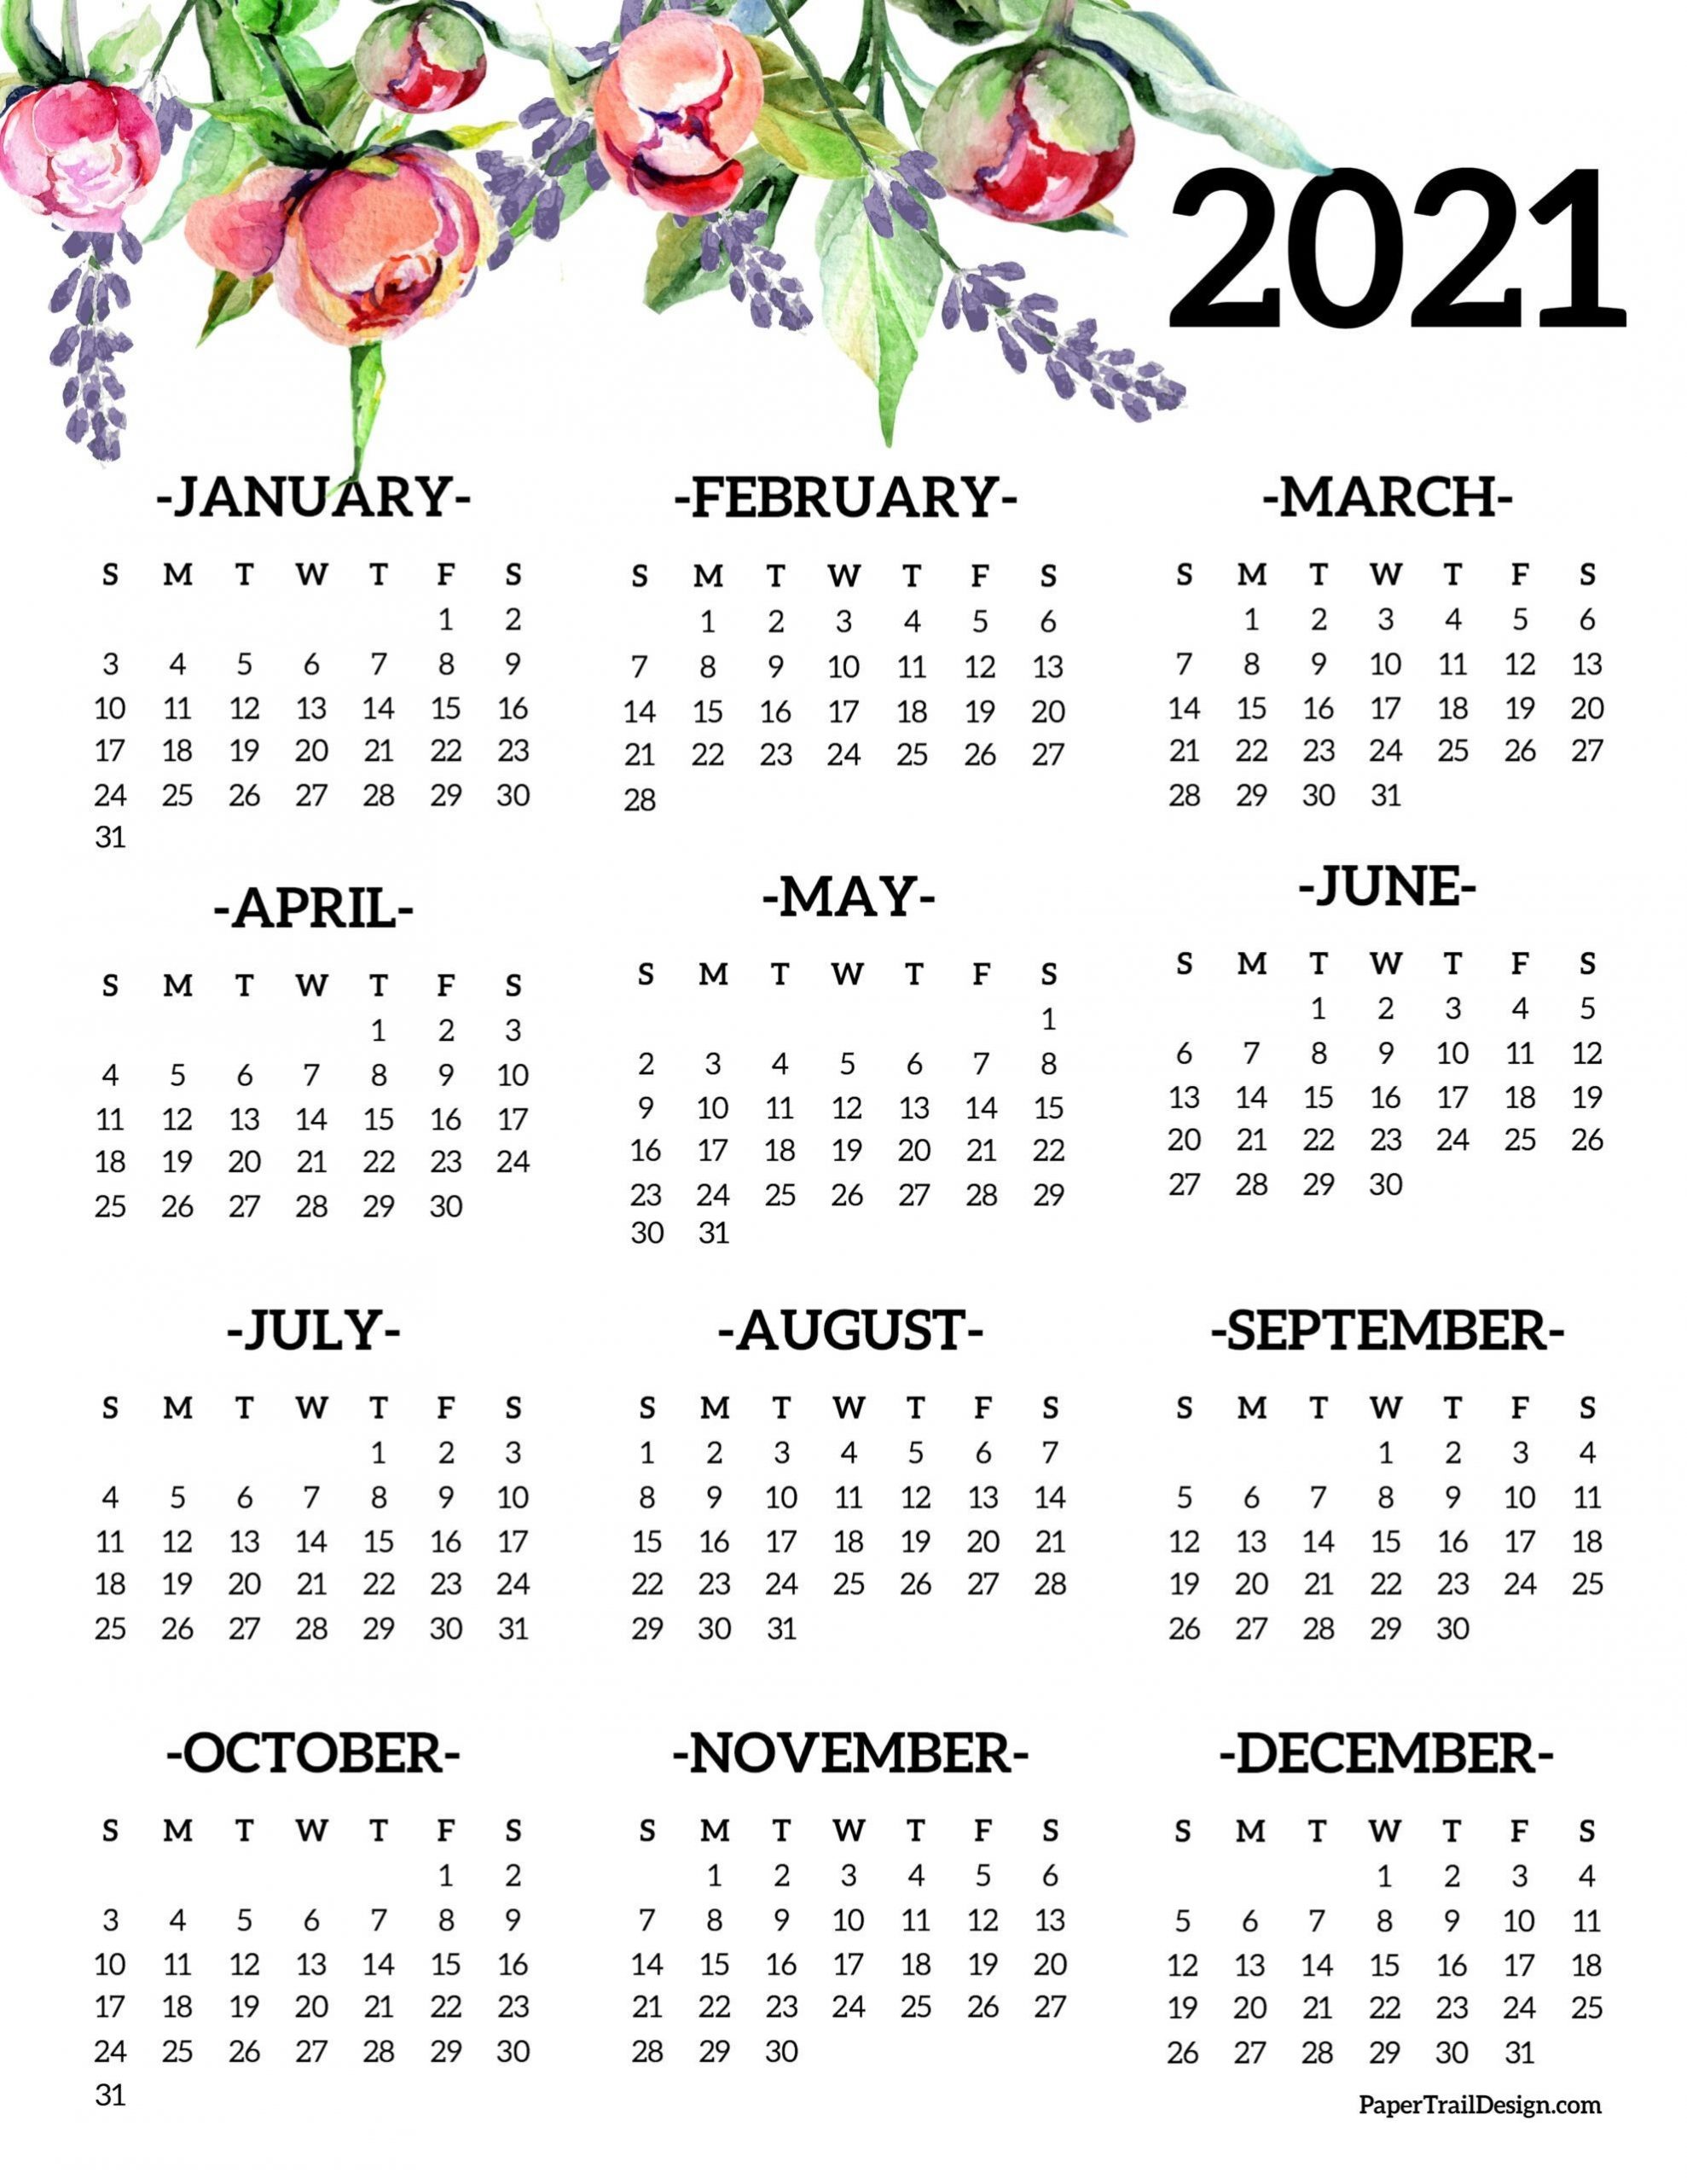 Free Printable 2021 One Page Floral Calendar | Paper Trail  Printable 2021 Calendar One Sheet